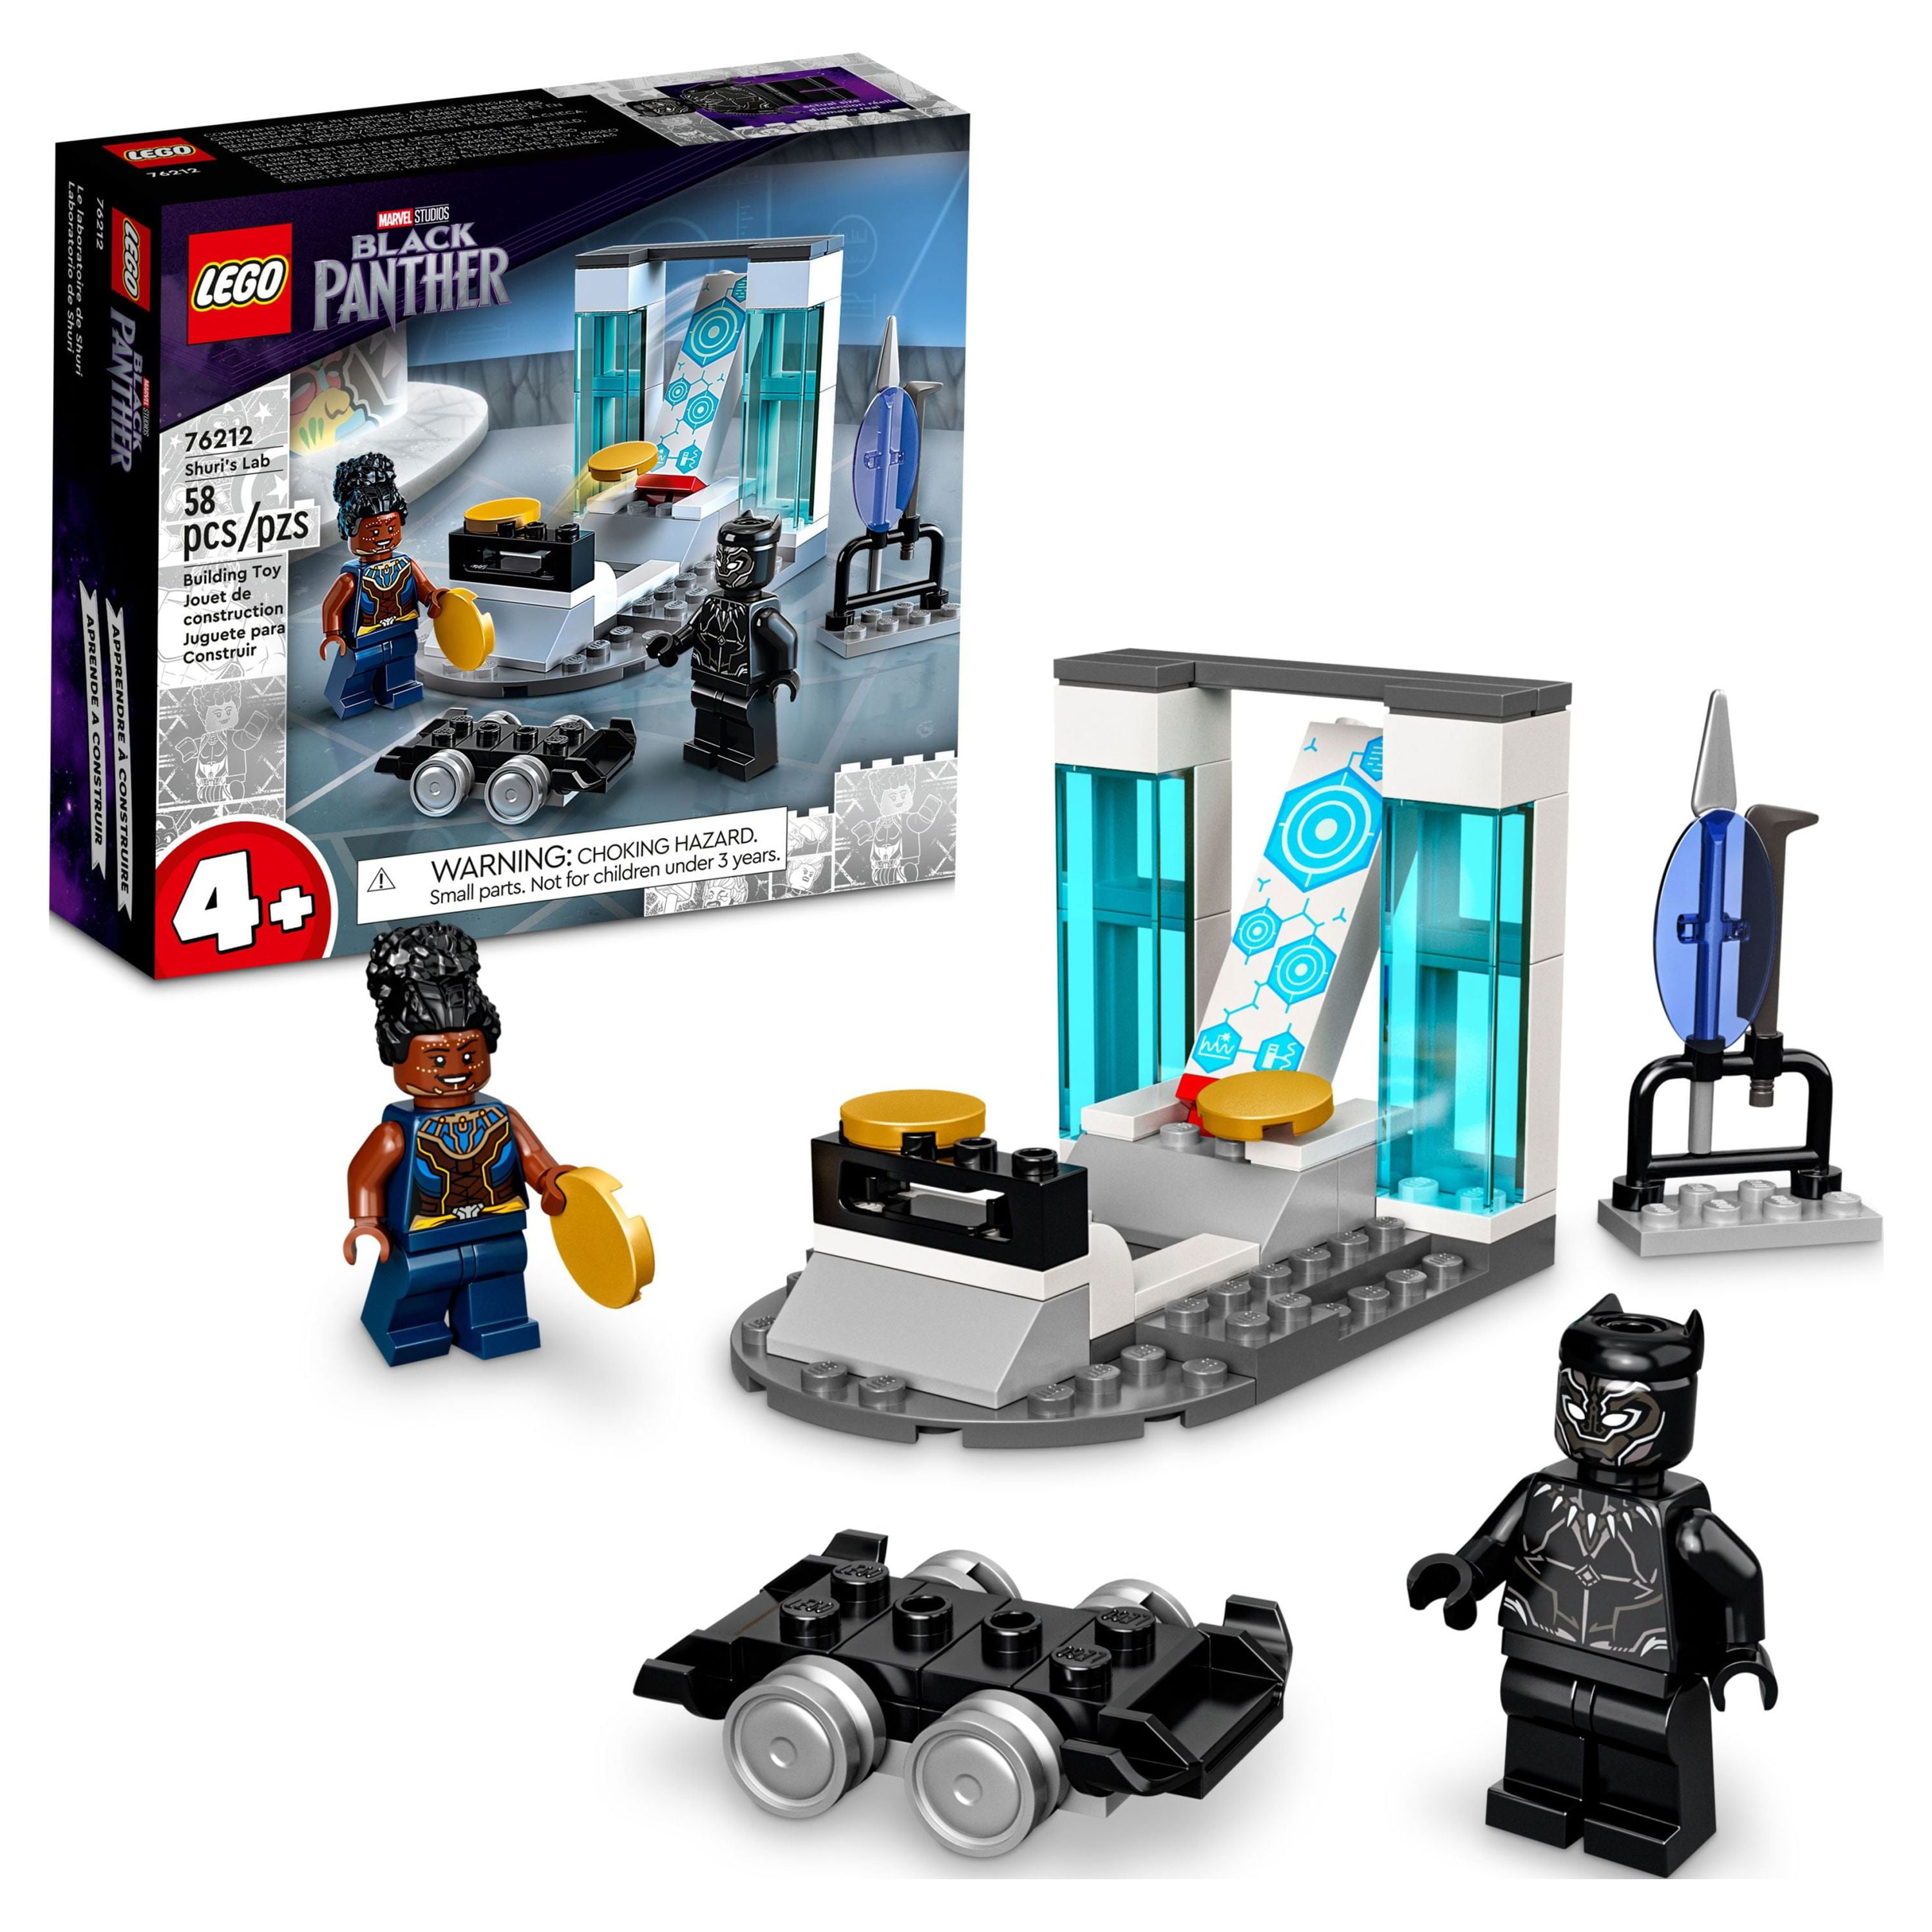 LEGO Marvel Shuri s Lab 76212 Black Panther Construction Learning Toy Minifigures Toys Kids Girls Boys Age 4 Avengers Super Heroes Gifts 82854e57 1ea8 4772 ac22 bae64ca1f390.4584cad922d7d611abd580cec9ce0ca5